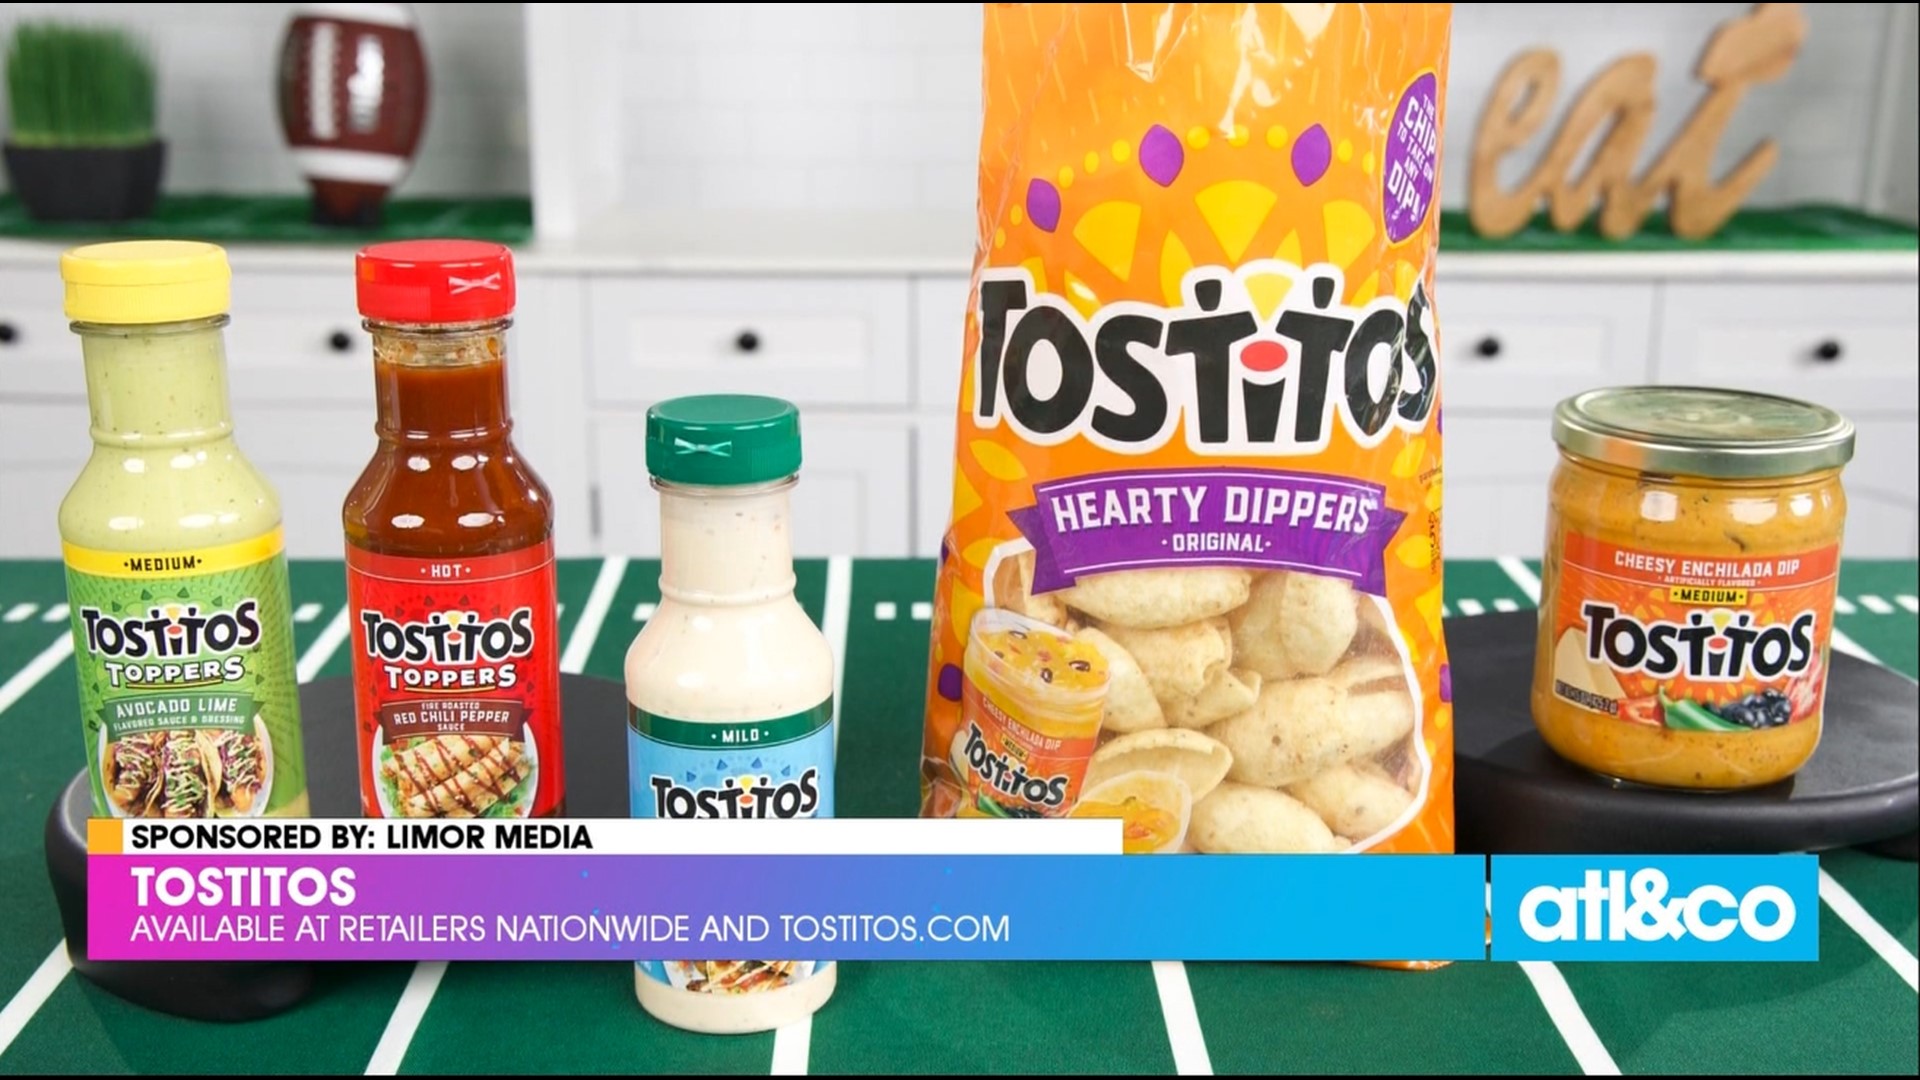 Lifestyle contributor Limor Suss brings your tailgate spread to the next level with Tostitos Hearty Dippers, Tostitos Cheesy Enchilada Dip, and Tostitos Toppers.